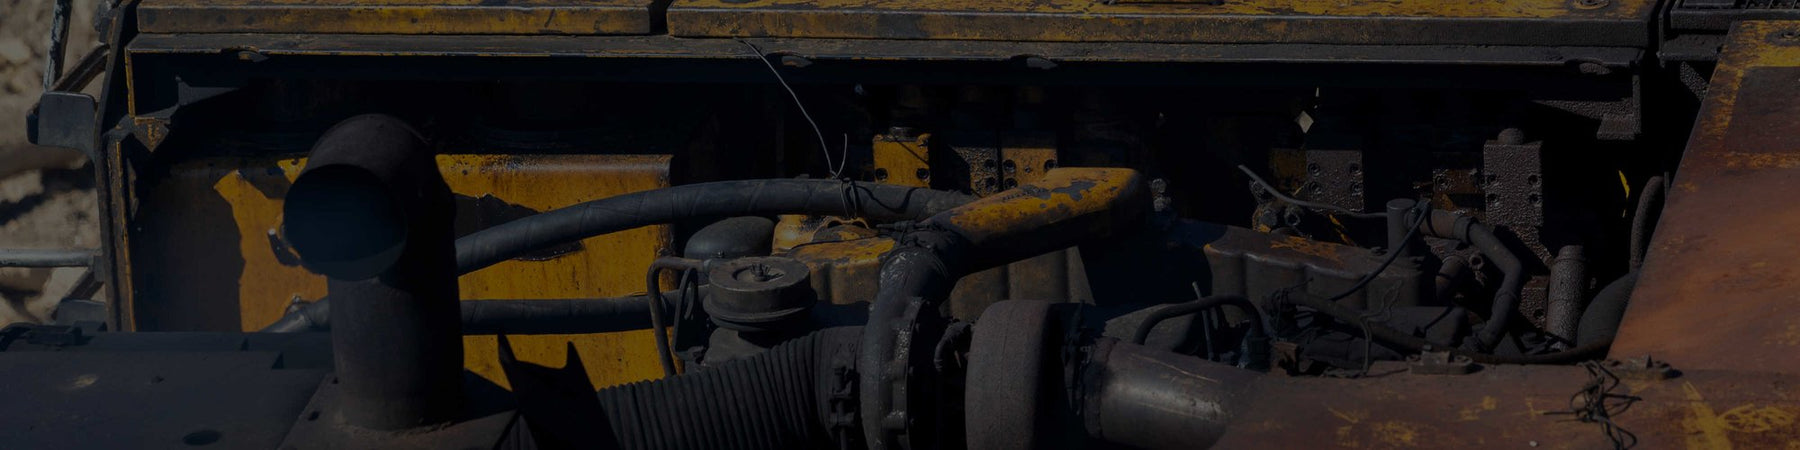 Engine Cooling System Maintenance for Heavy Equipment 101